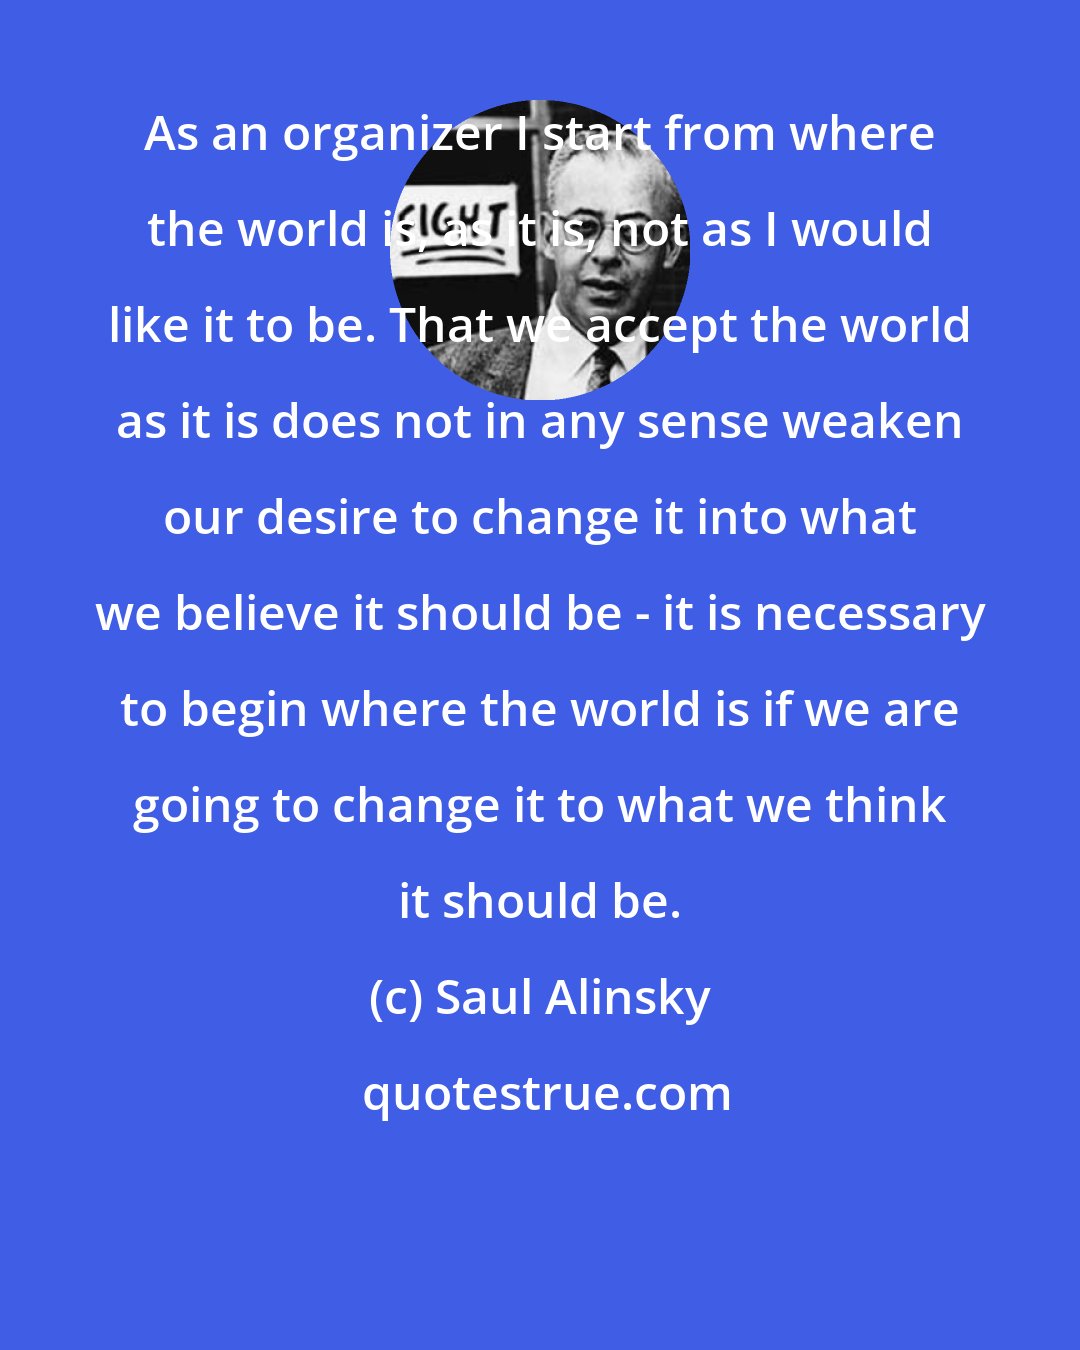 Saul Alinsky: As an organizer I start from where the world is, as it is, not as I would like it to be. That we accept the world as it is does not in any sense weaken our desire to change it into what we believe it should be - it is necessary to begin where the world is if we are going to change it to what we think it should be.